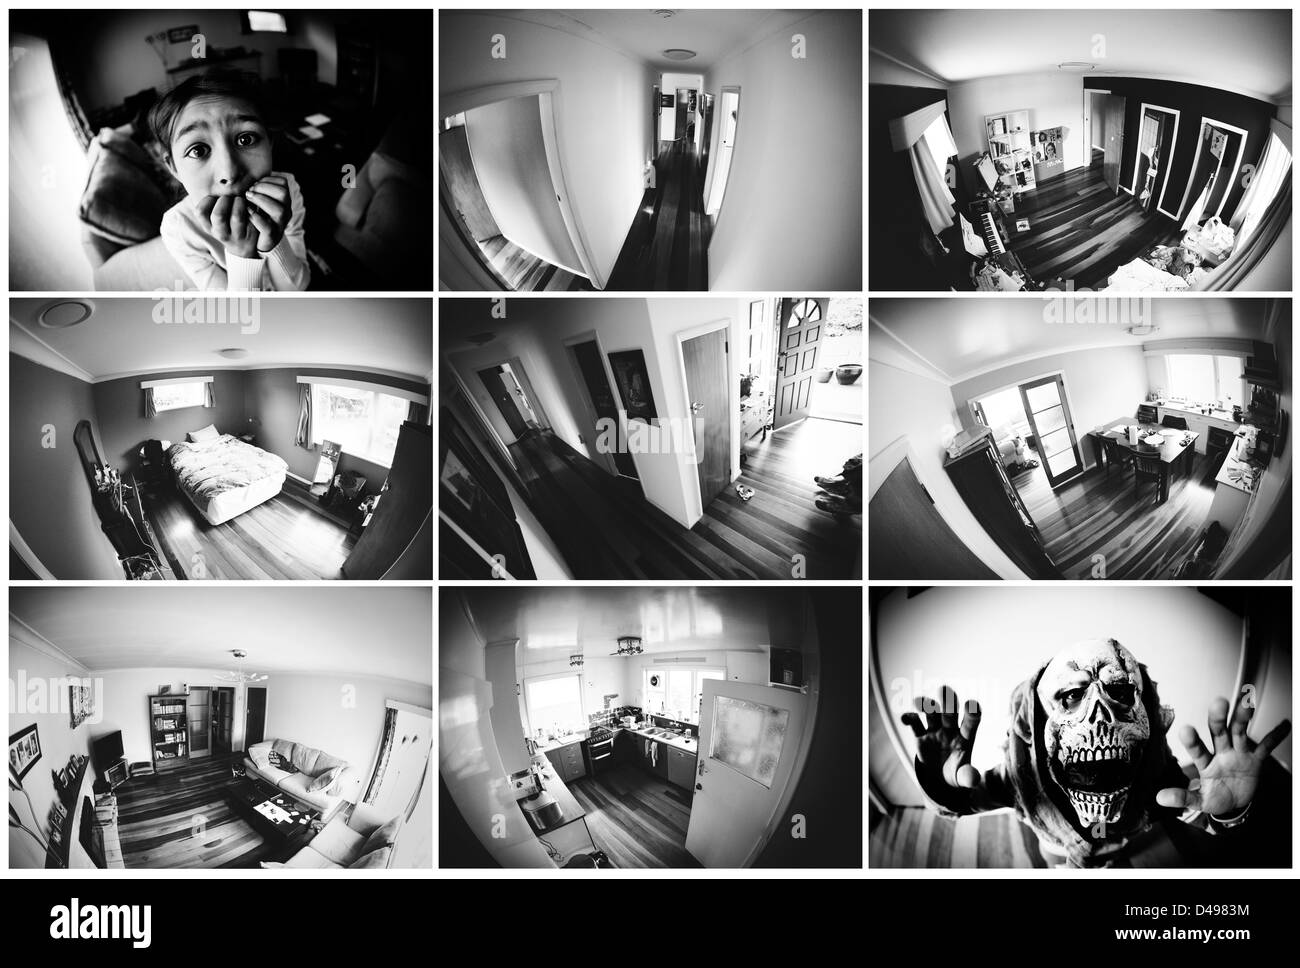 Security camera Black and White Stock Photos & Images - Alamy